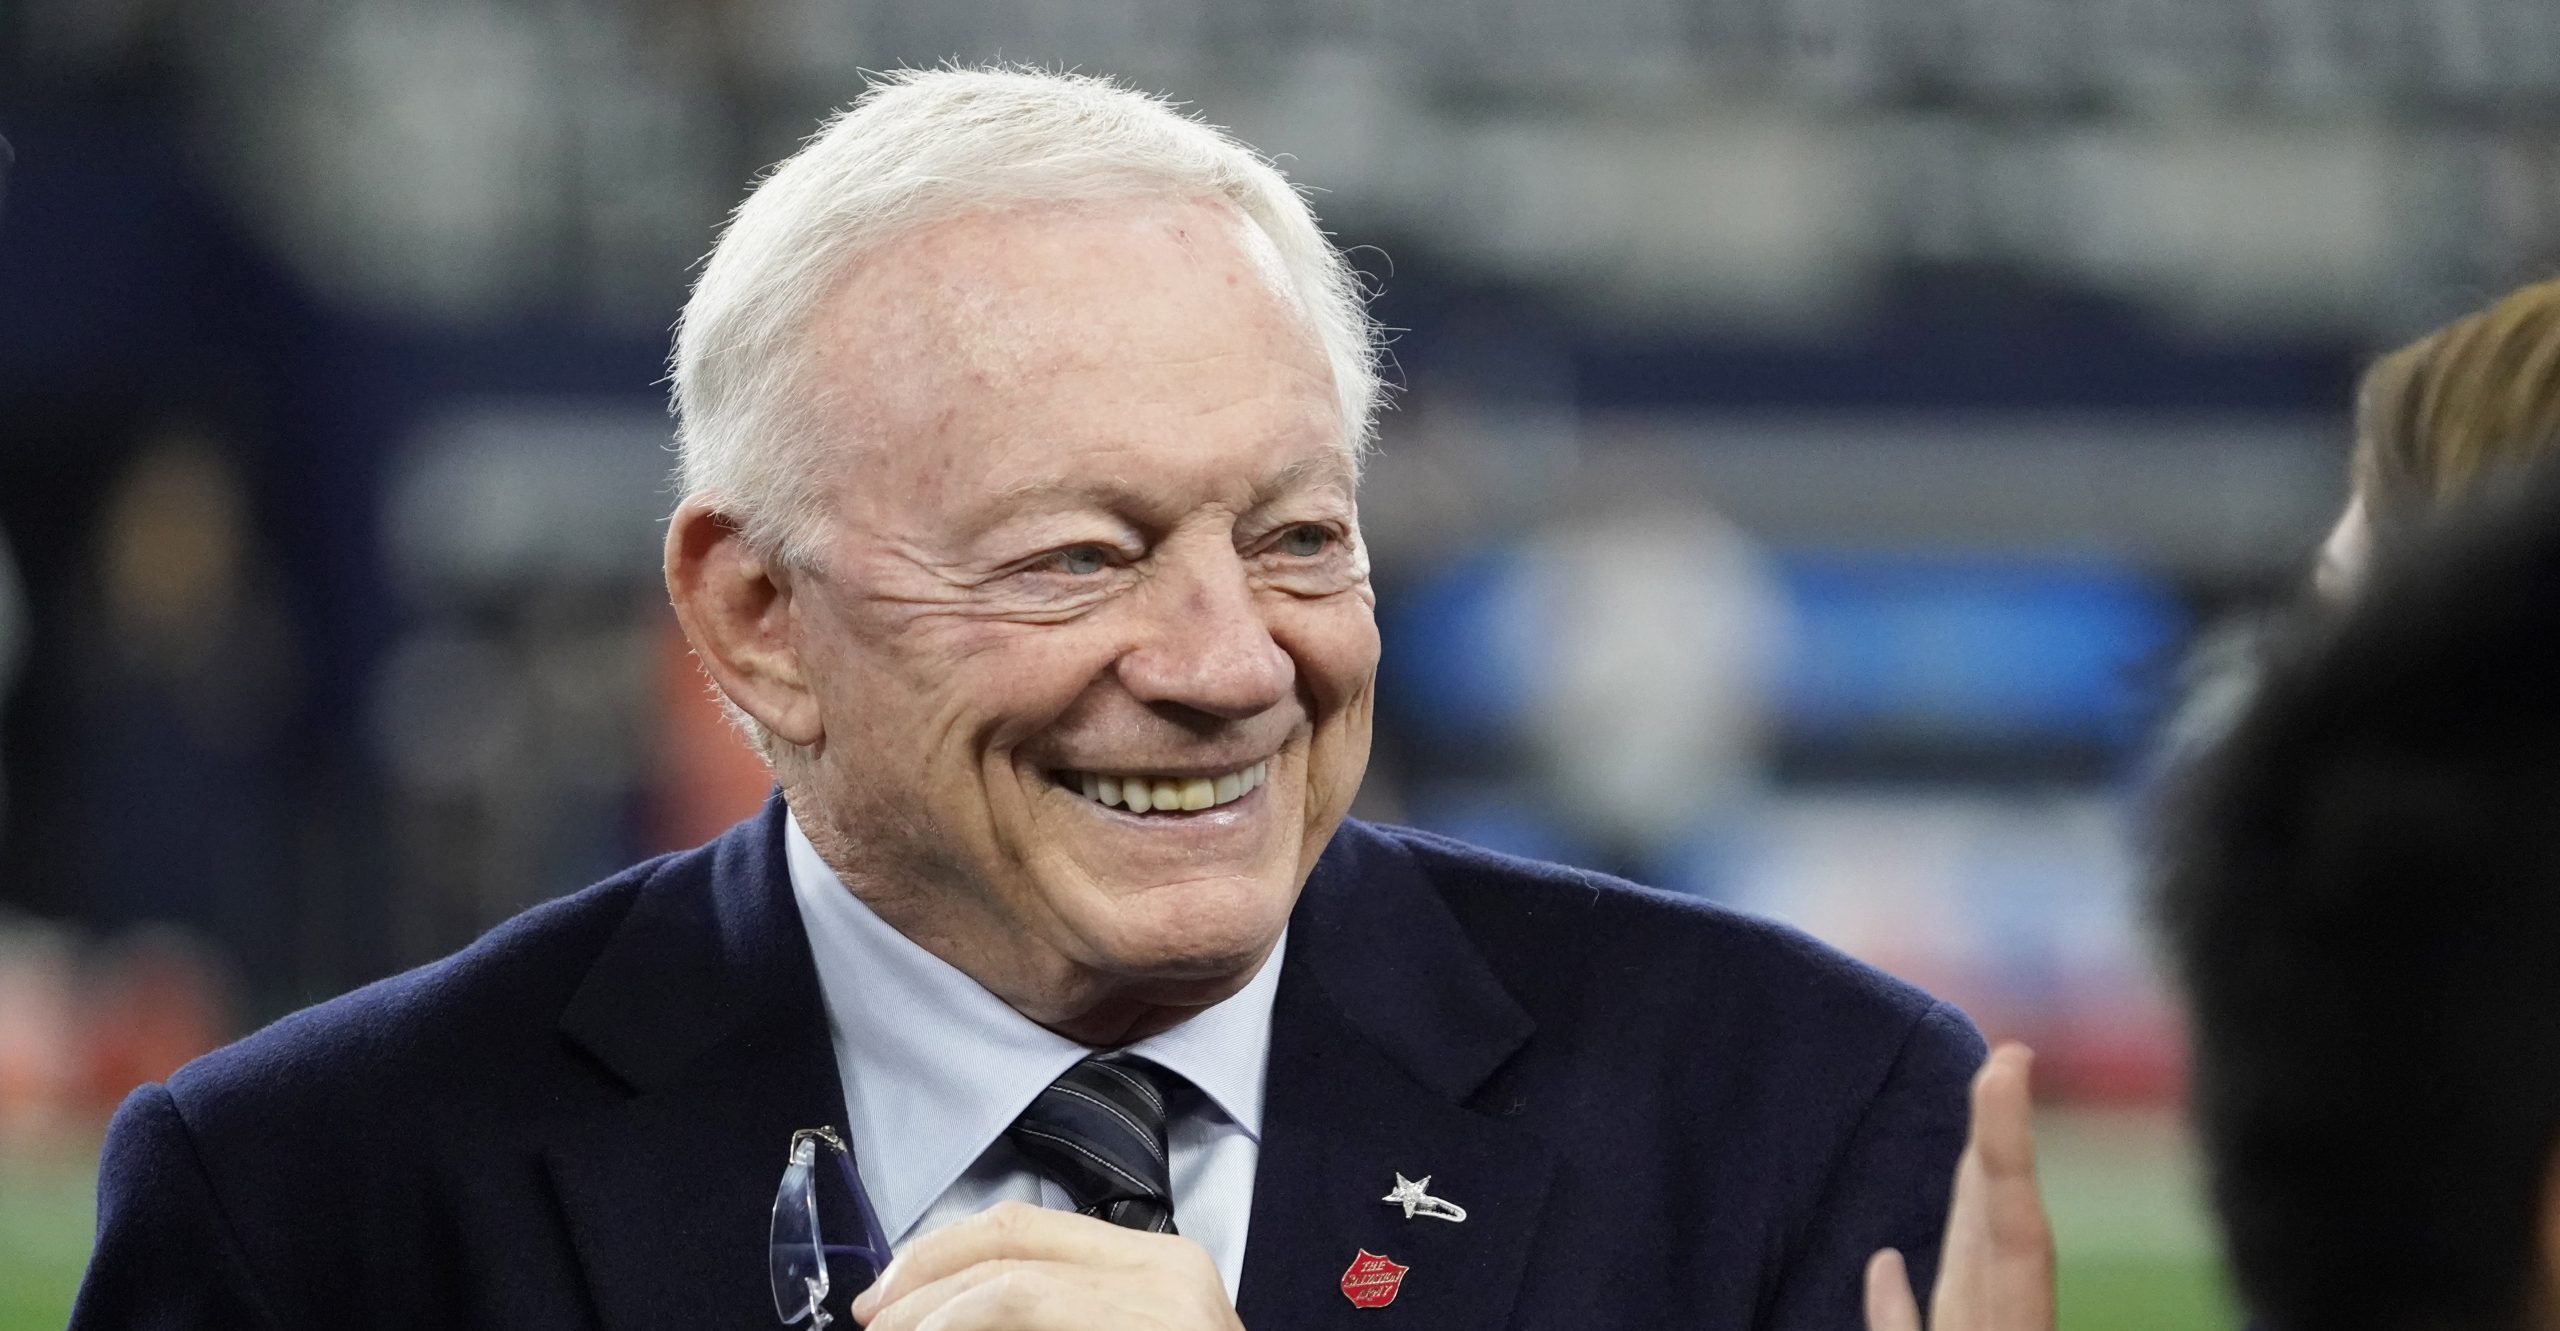 Dec 11, 2022; Arlington, Texas, USA; Dallas Cowboys owner Jerry Jones on the field prior to a game against the Houston Texans at AT&T Stadium. Mandatory Credit: Raymond Carlin III-USA TODAY Sports